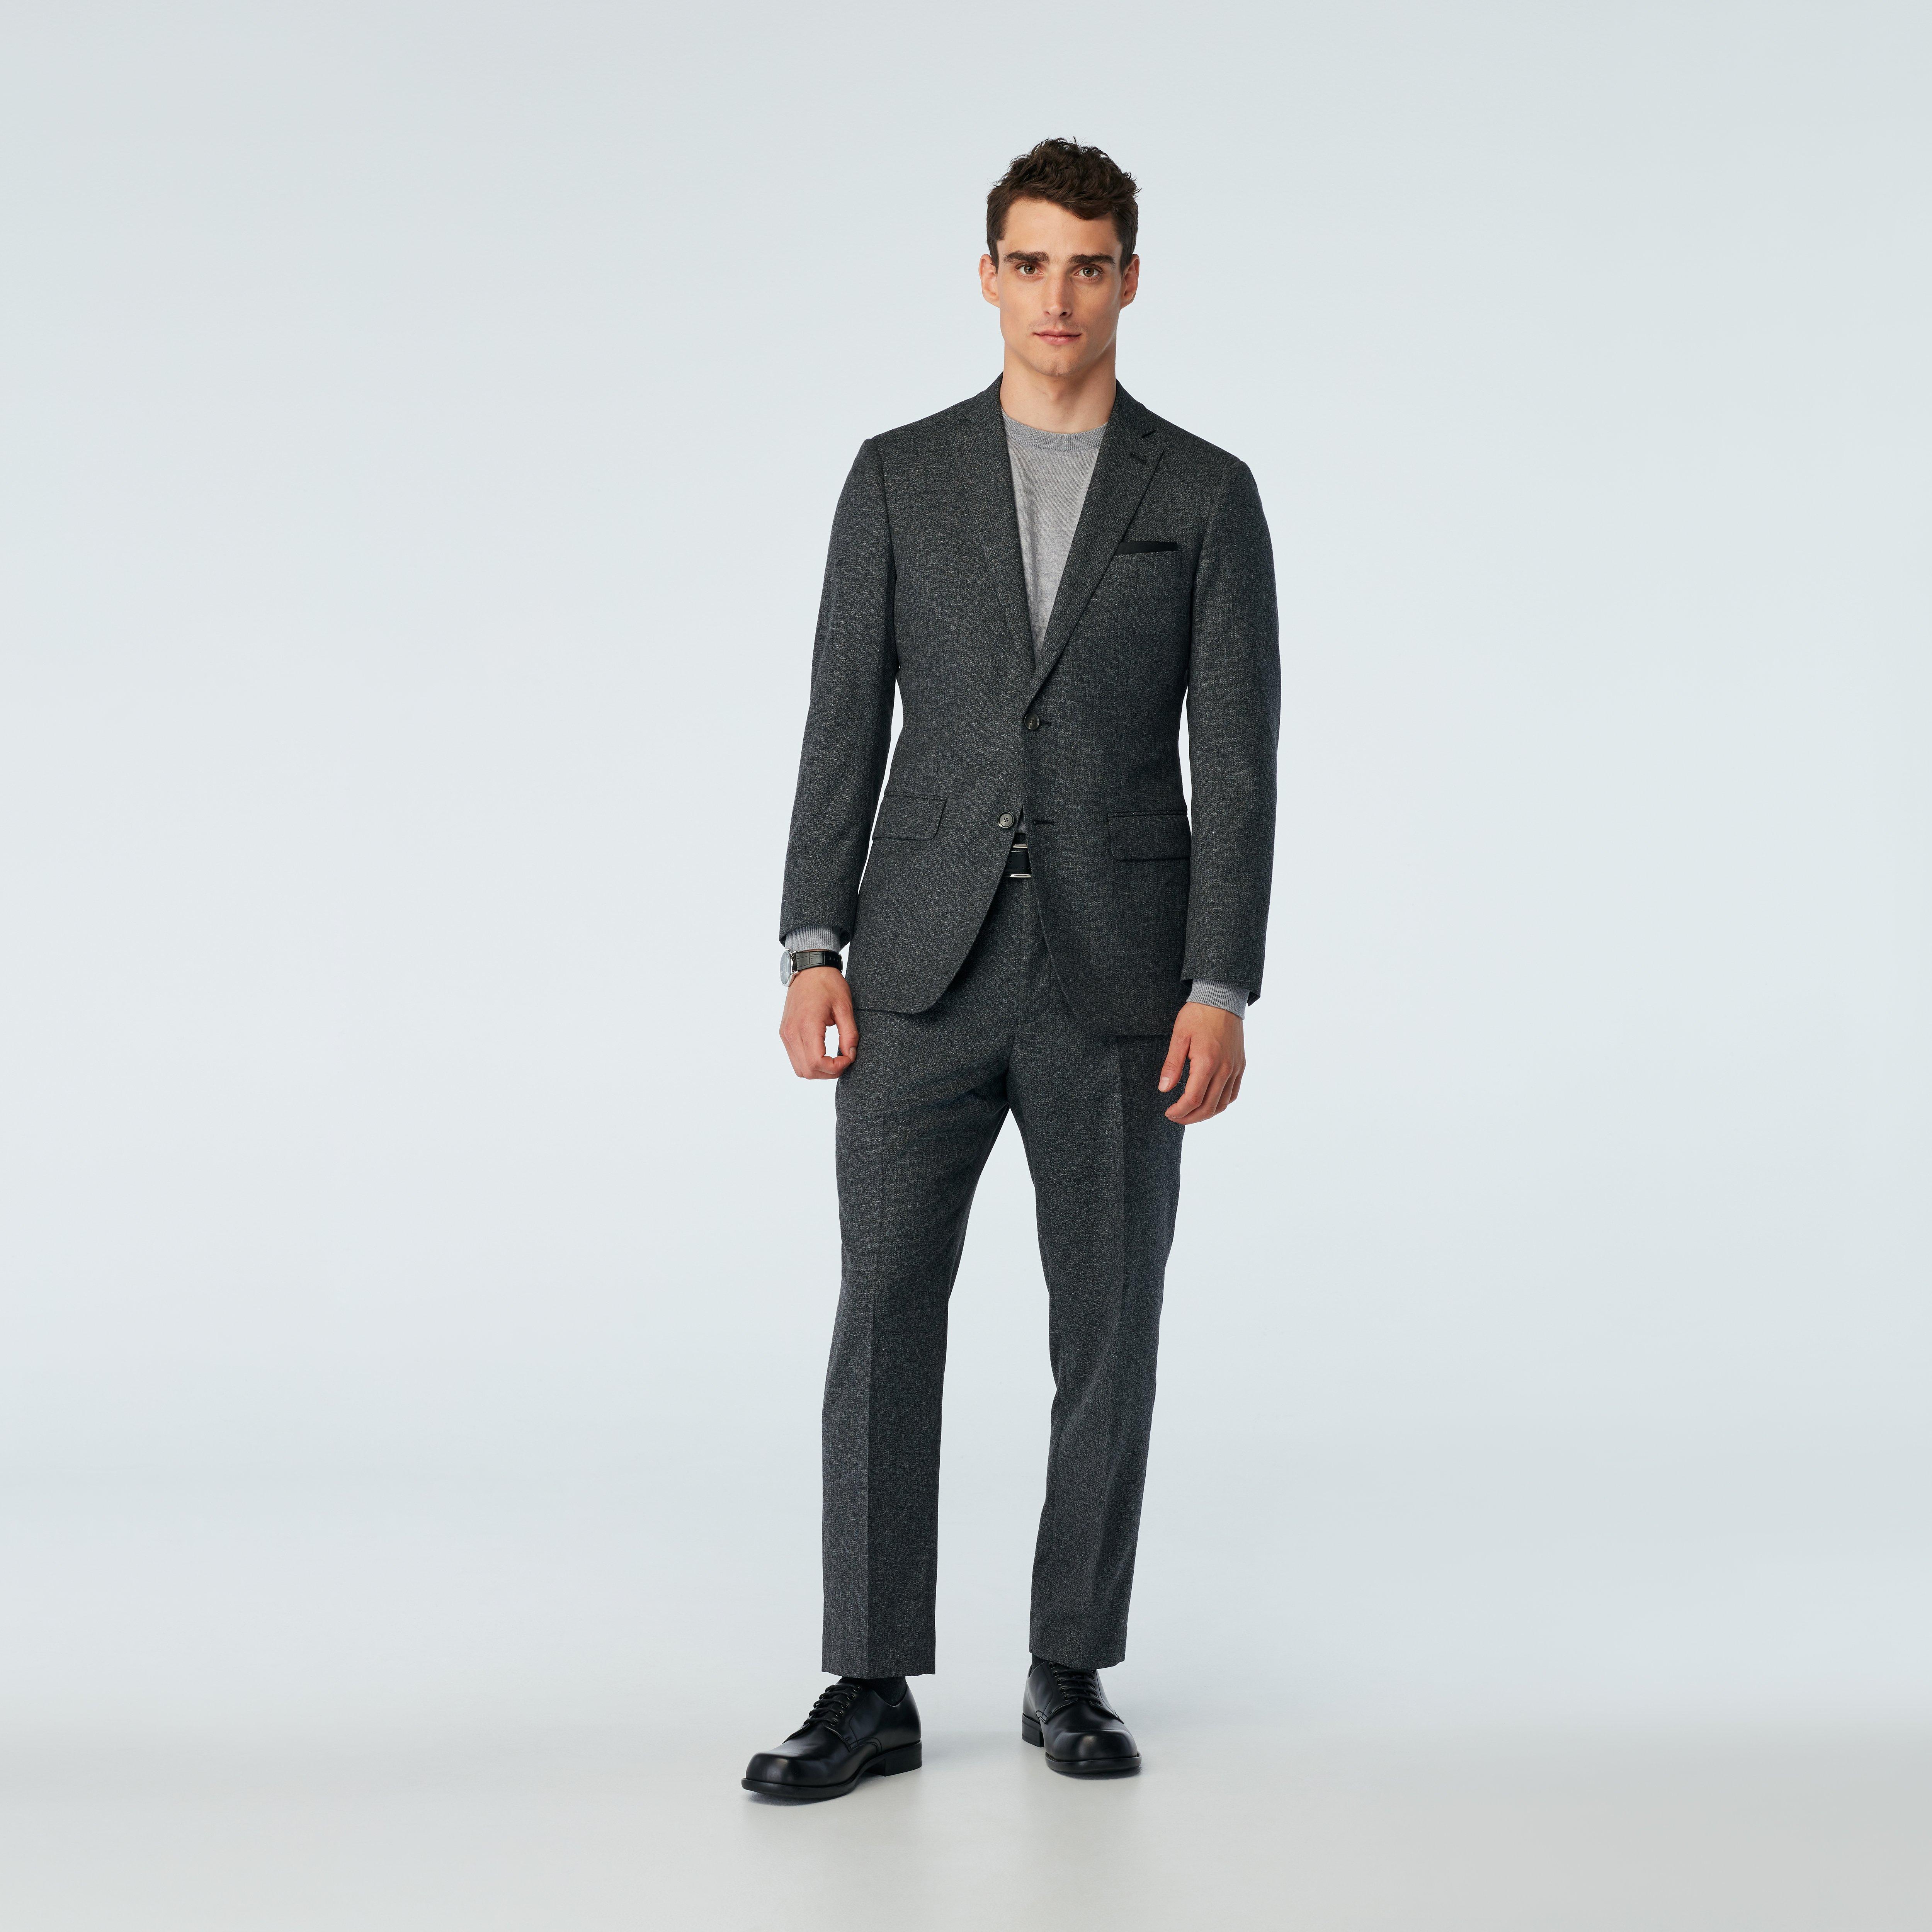 Men's Custom Suits - Marche Wool Blend Stretch Charcoal Suit | INDOCHINO